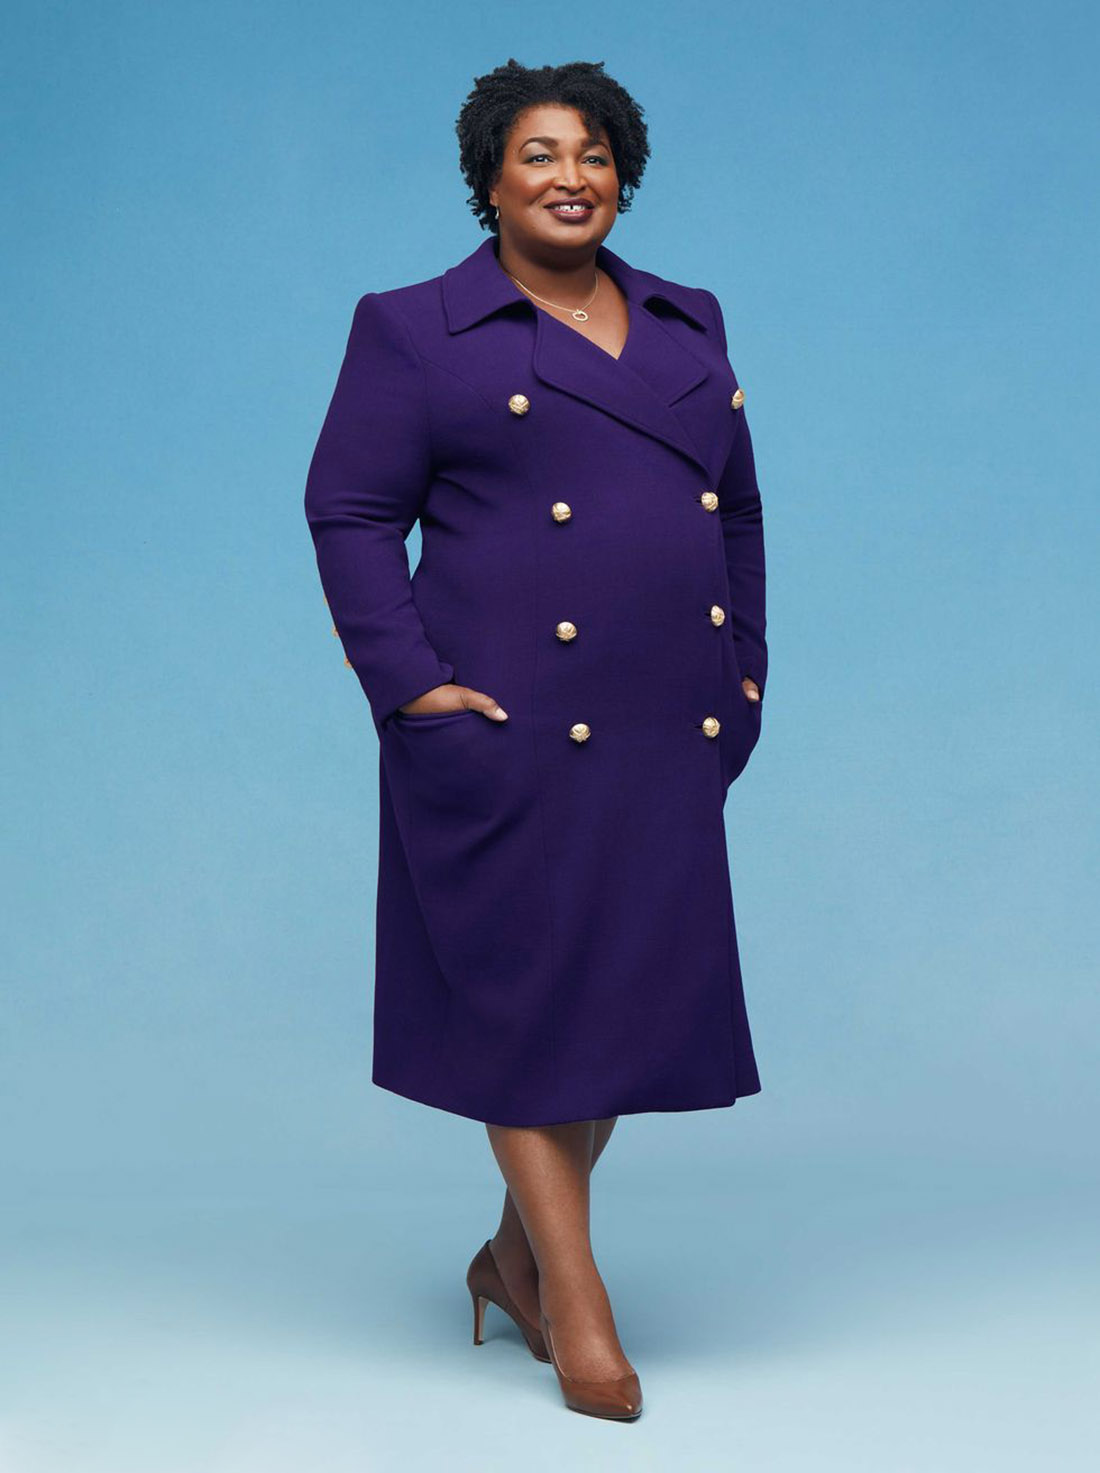 Stacey Abrams covers Marie Claire US April 2021 by AB + DM